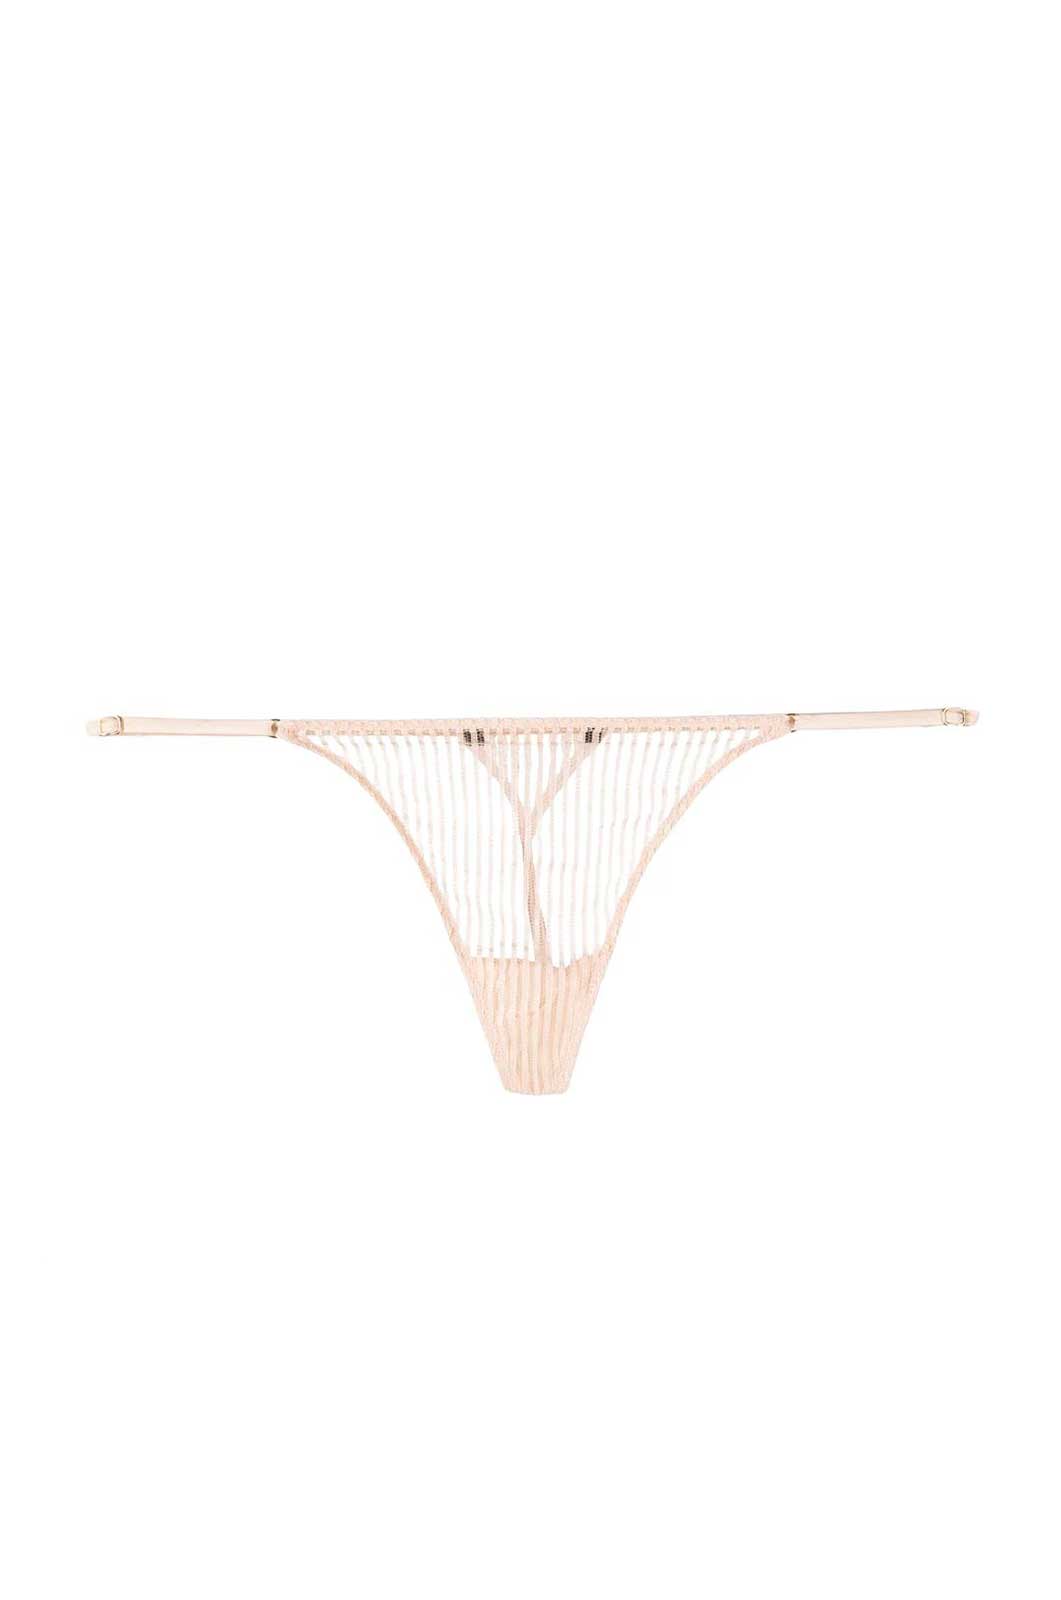 SHEER STRIPED LACE G-STRING